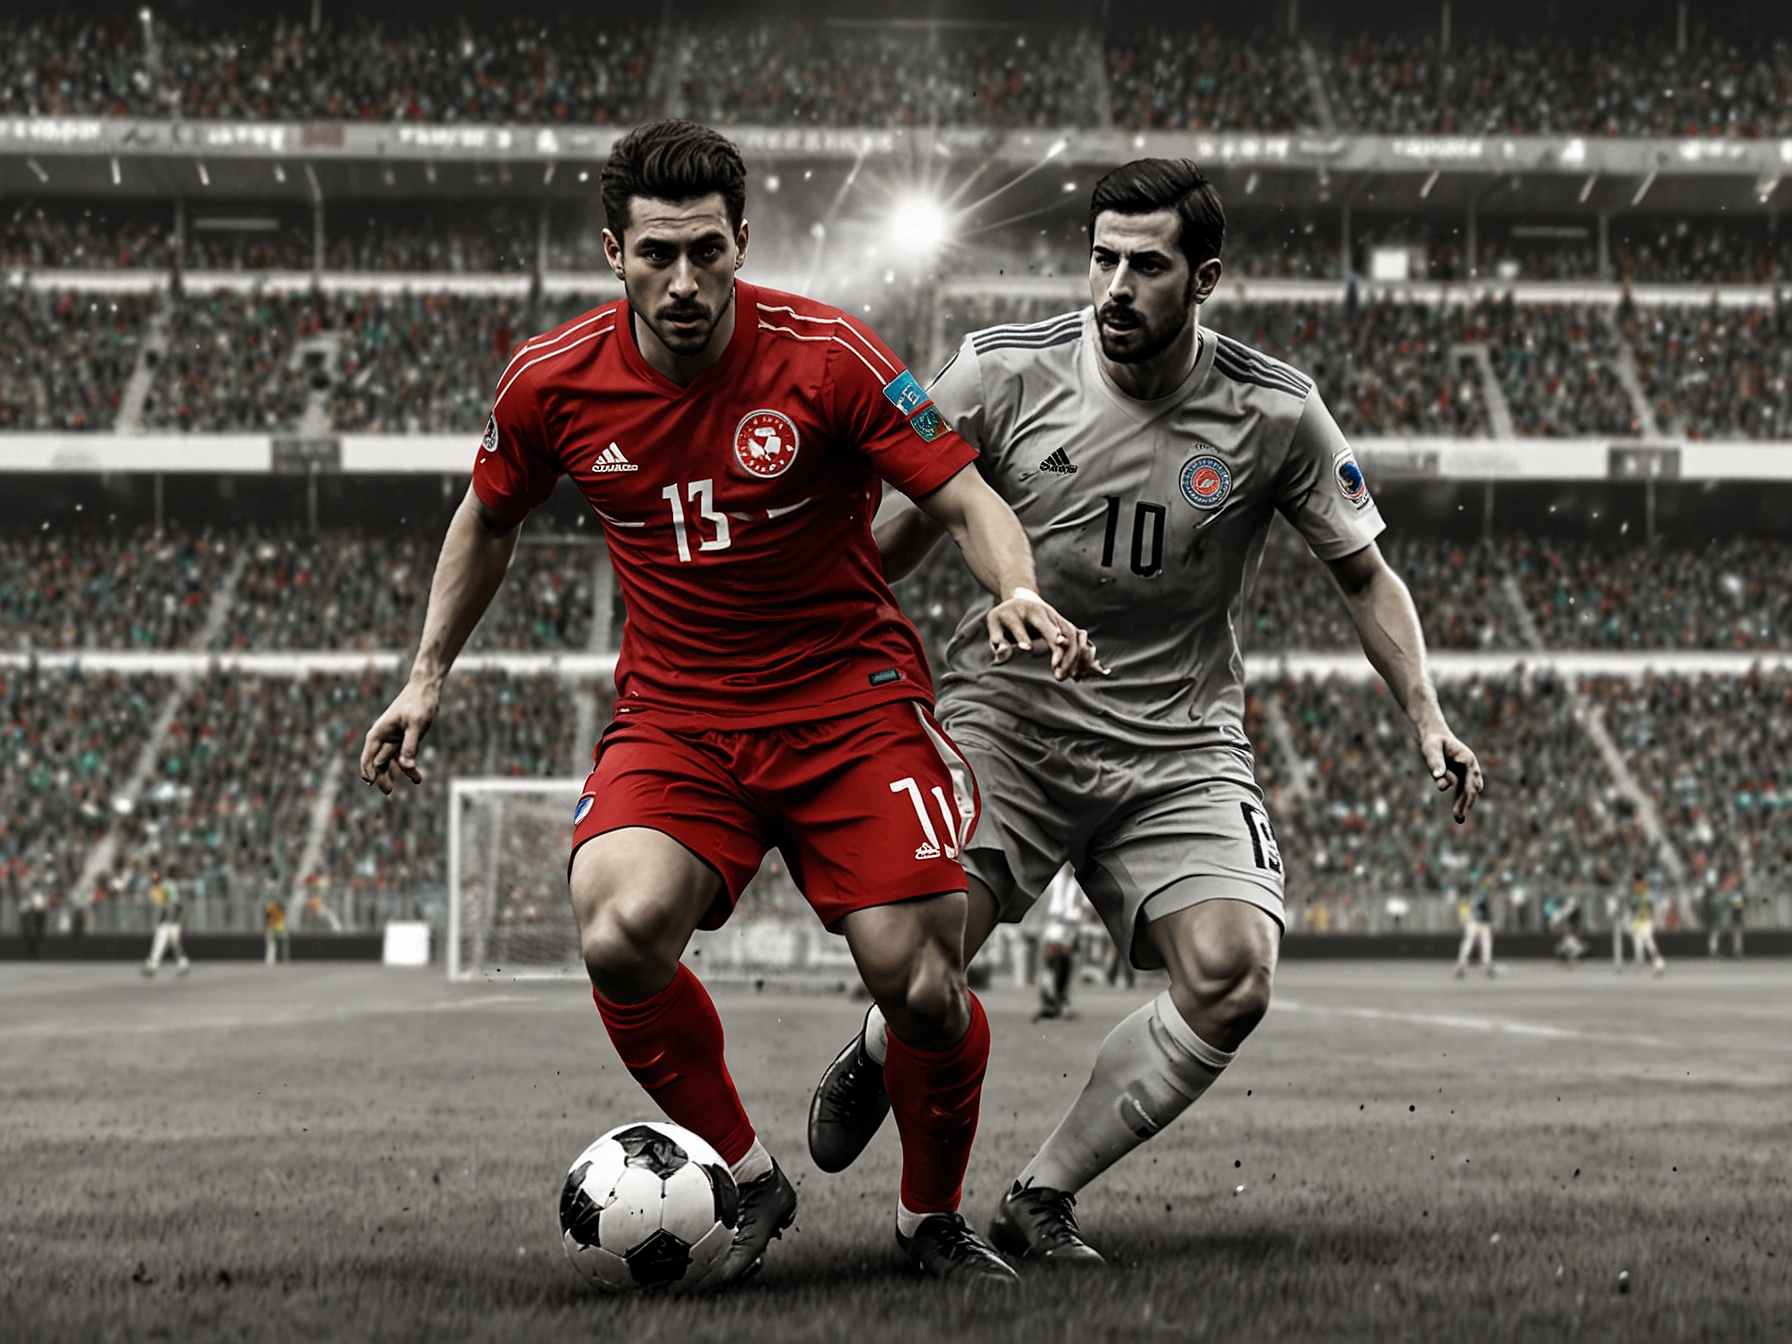 An illustration of a football match between Turkey and Georgia, showcasing key players like Hakan Çalhanoğlu and Khvicha Kvaratskhelia in action, illustrating the competitive nature and the dynamic midfield battle.